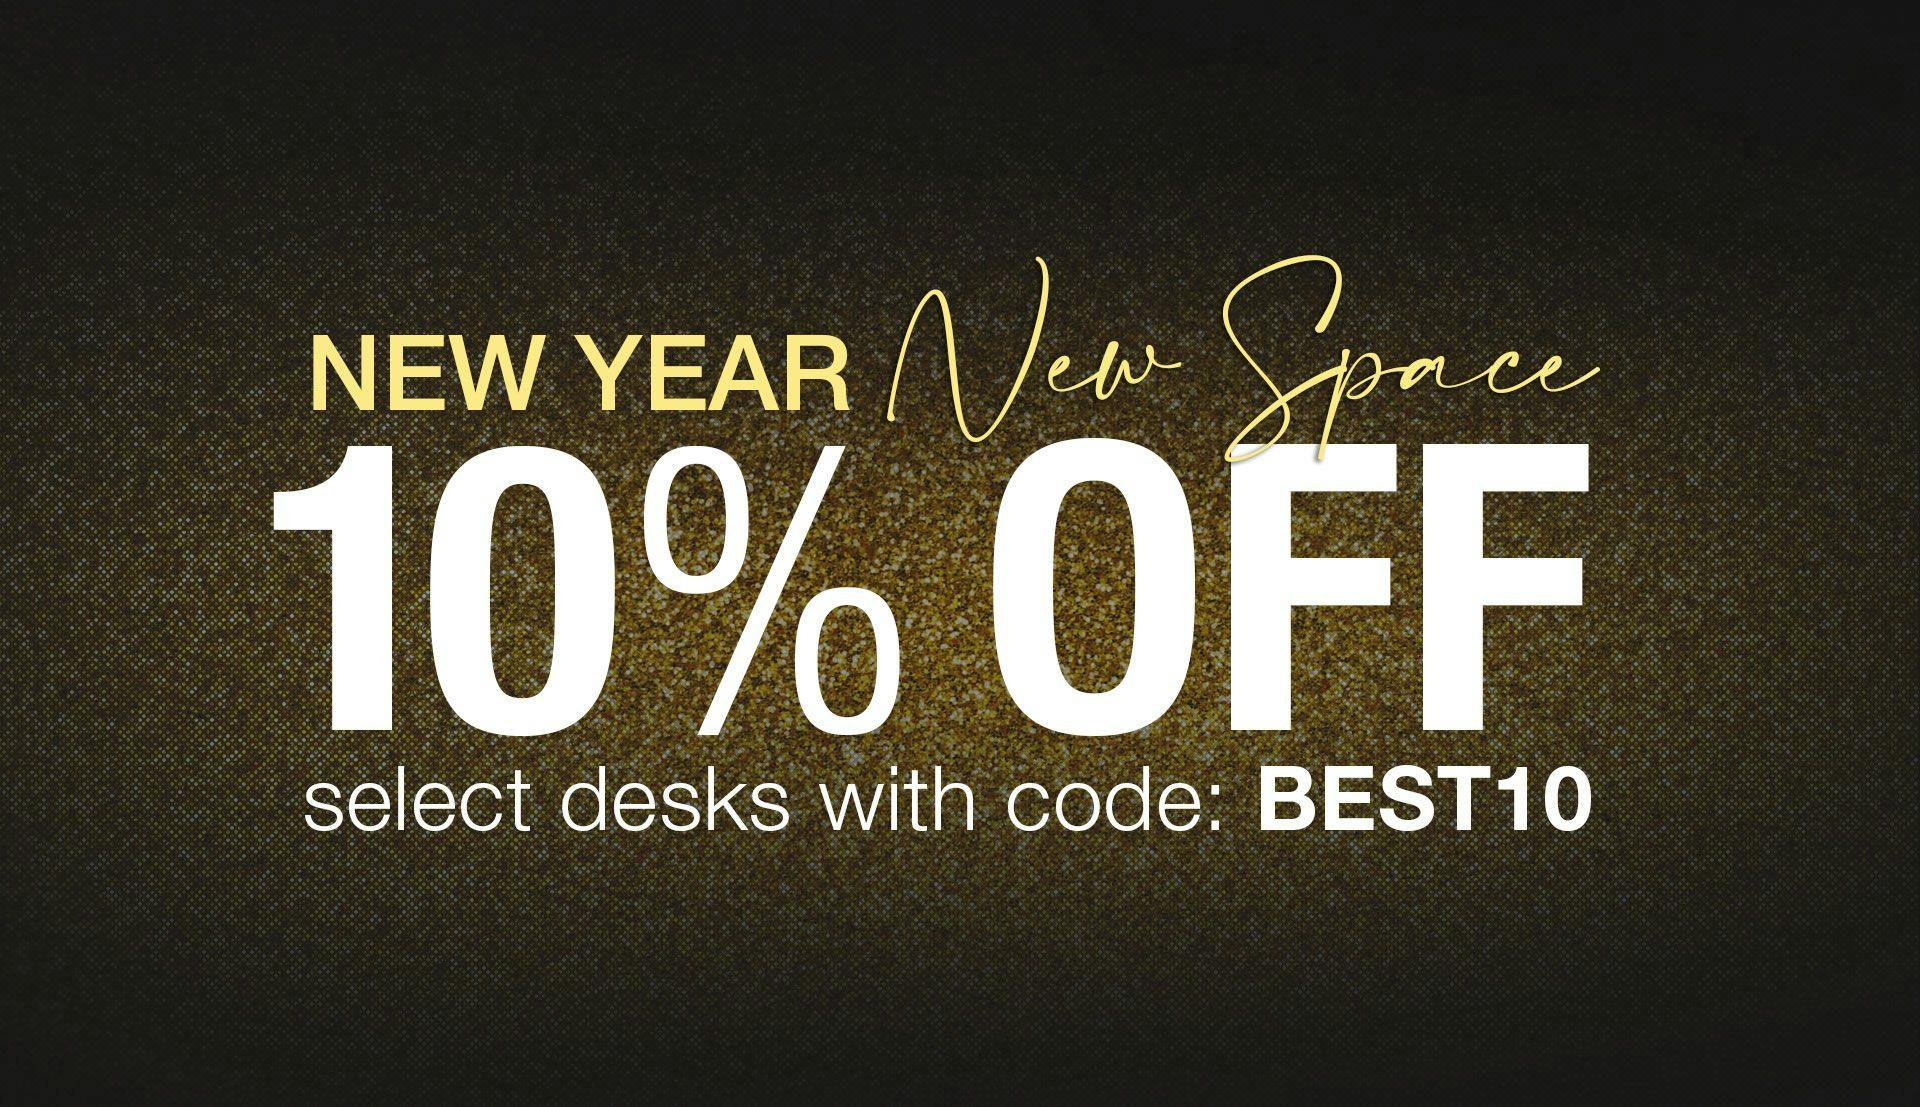 10% off Select Desks with code BEST10